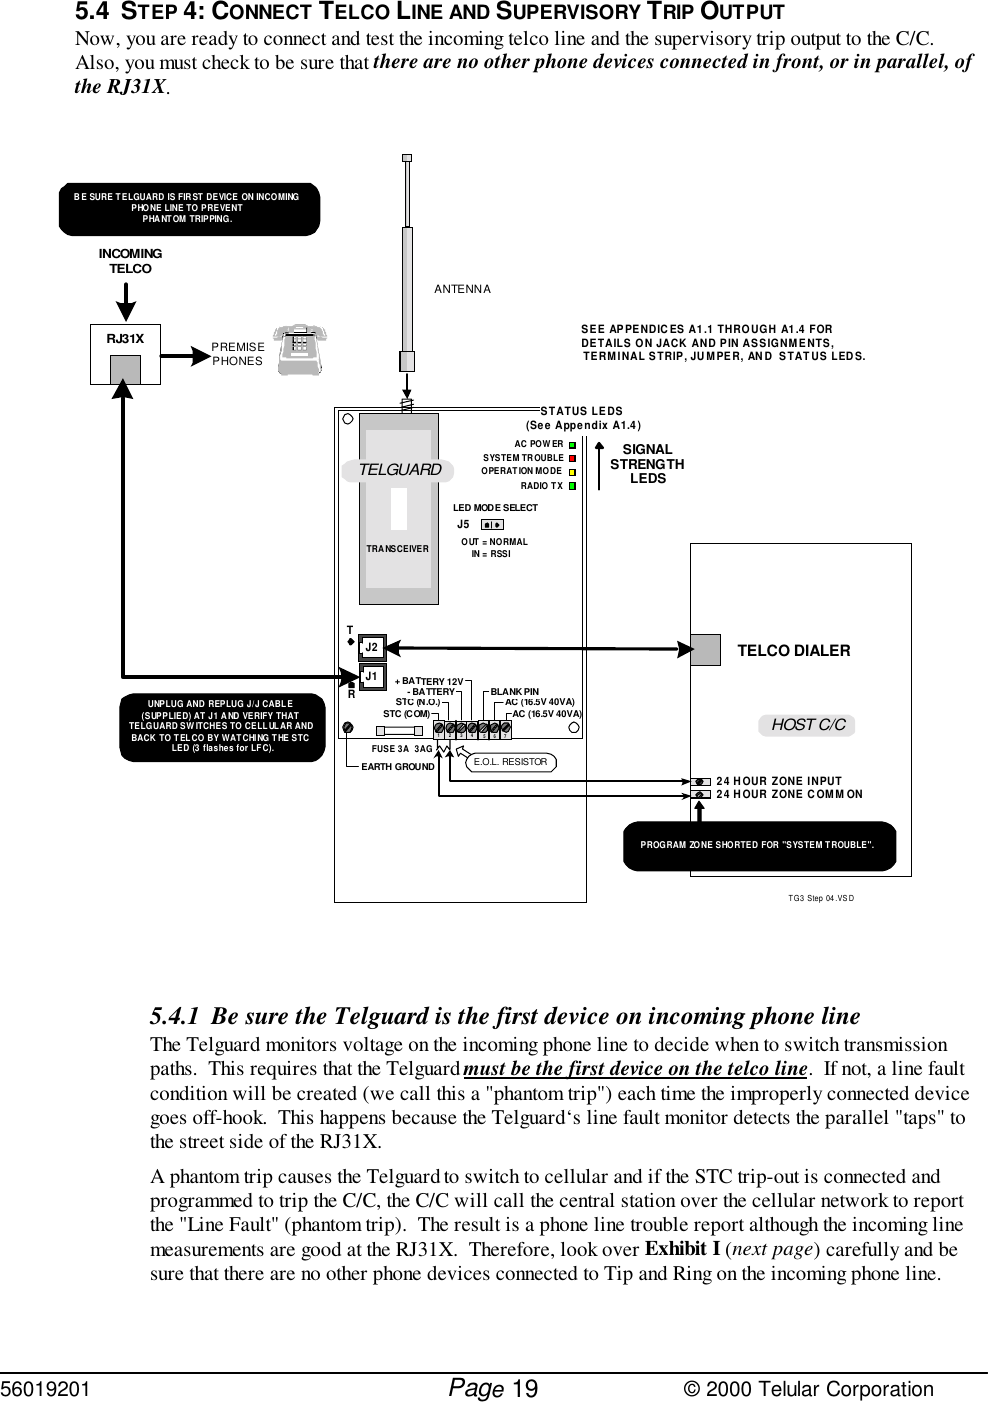 56019201         Page                             © 2000 Telular Corporation195.4 STEP 4: CONNECT TELCO LINE AND SUPERVISORY TRIP OUTPUTNow, you are ready to connect and test the incoming telco line and the supervisory trip output to the C/C. Also, you must check to be sure that there are no other phone devices connected in front, or in parallel, ofthe RJ31X. TG3  Step  04 .VS DHOST C/C24 HOUR ZONE COMM ON24 HOUR ZONE INPUTTELCO DIALERDETAILS ON JACK AND PIN ASSIGNMENTS,TERMINAL STRIP, JUMPER, AND  STATUS LEDS.SEE APPENDICES A1.1 THROUGH A1.4 FORJ2FUSE 3A  3AGTR1234 56STC (COM)STC (N.O.)+ BATTERY 12V- BATTERY7AC (16.5V 40VA)AC (16.5V 40VA)BLANK PINJ1EARTH GROUNDUNPLUG AND REPLUG J/J CABL E(SUPPLIED) AT J1 AND VERIFY THATTELGUARD SWITCHES TO CELLULAR ANDBACK TO TELCO BY  WATCHING THE STCLED (3 flashes for LFC).PROGRAM ZONE SHORTED FOR &quot;SYSTEM TROUBLE&quot;.E.O.L. RESISTORRANTENNATRANSCEIVERRJ31XPREMISEPHONESINCOMINGTELCOTELGUARDLED MODE SELECTJ5IN =  RSSIOUT = NORMALSIGNALSTRENGTHLEDSAC POW ERSYSTEM TROUBLERADIO TXOPERATION MODESTATUS LEDS(See Appendix A1.4) BE SURE TELGUARD IS FIR ST DEVICE ON INCOMINGPHONE LINE TO PREVENTPHANTOM TRIPPING.5.4.1 Be sure the Telguard is the first device on incoming phone lineThe Telguard monitors voltage on the incoming phone line to decide when to switch transmissionpaths.  This requires that the Telguard must be the first device on the telco line.  If not, a line faultcondition will be created (we call this a &quot;phantom trip&quot;) each time the improperly connected devicegoes off-hook.  This happens because the Telguard‘s line fault monitor detects the parallel &quot;taps&quot; tothe street side of the RJ31X. A phantom trip causes the Telguard to switch to cellular and if the STC trip-out is connected andprogrammed to trip the C/C, the C/C will call the central station over the cellular network to reportthe &quot;Line Fault&quot; (phantom trip).  The result is a phone line trouble report although the incoming linemeasurements are good at the RJ31X.  Therefore, look over Exhibit I (next page) carefully and besure that there are no other phone devices connected to Tip and Ring on the incoming phone line.